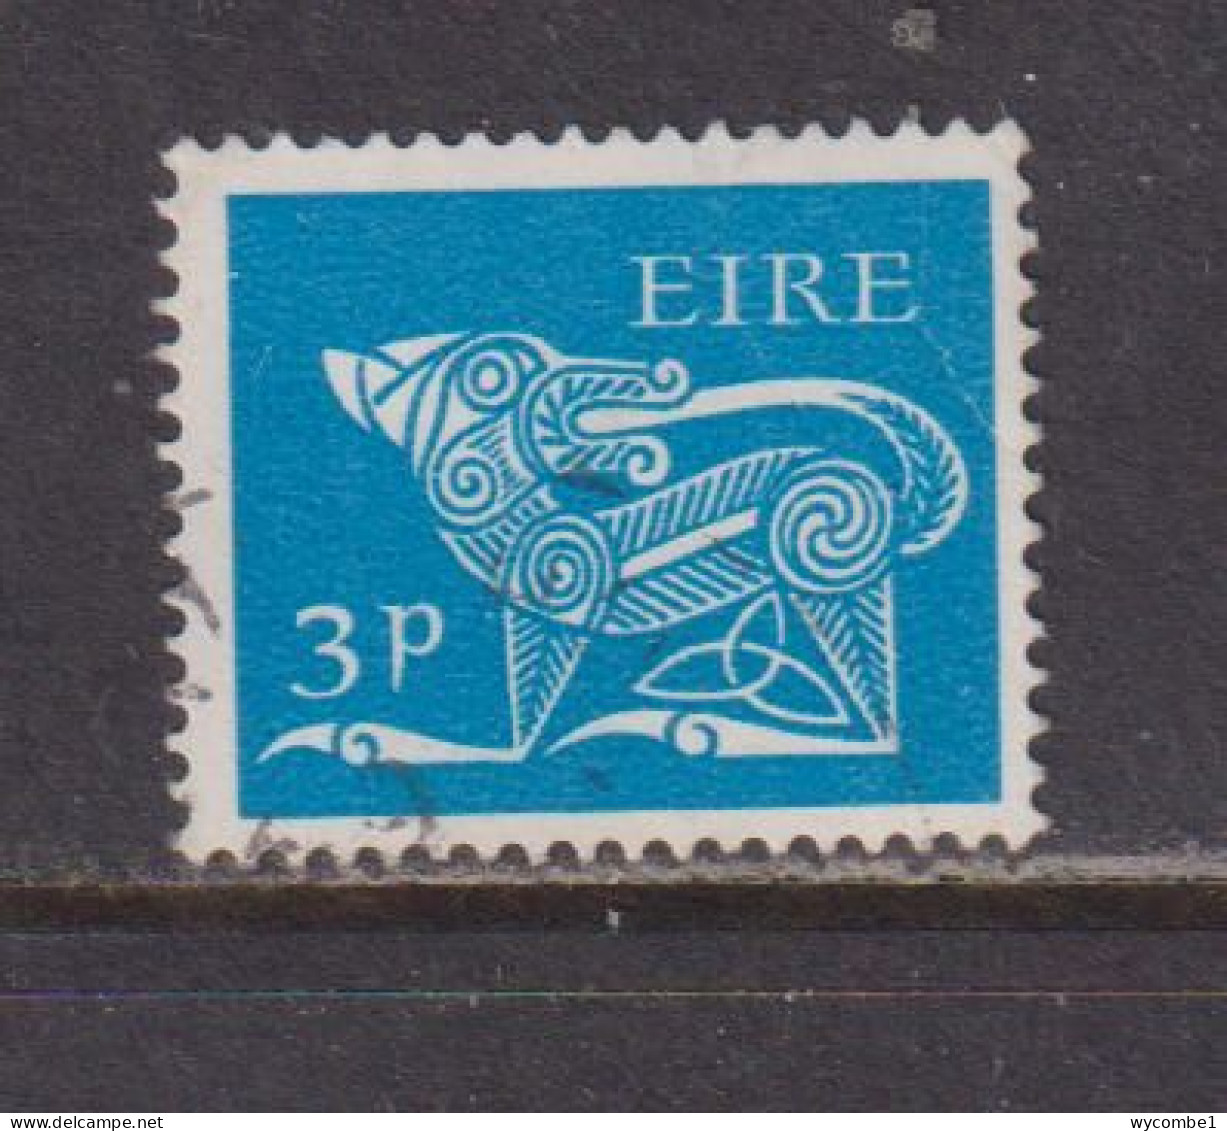 IRELAND - 1968  Definitives  3d  Used As Scan - Usati